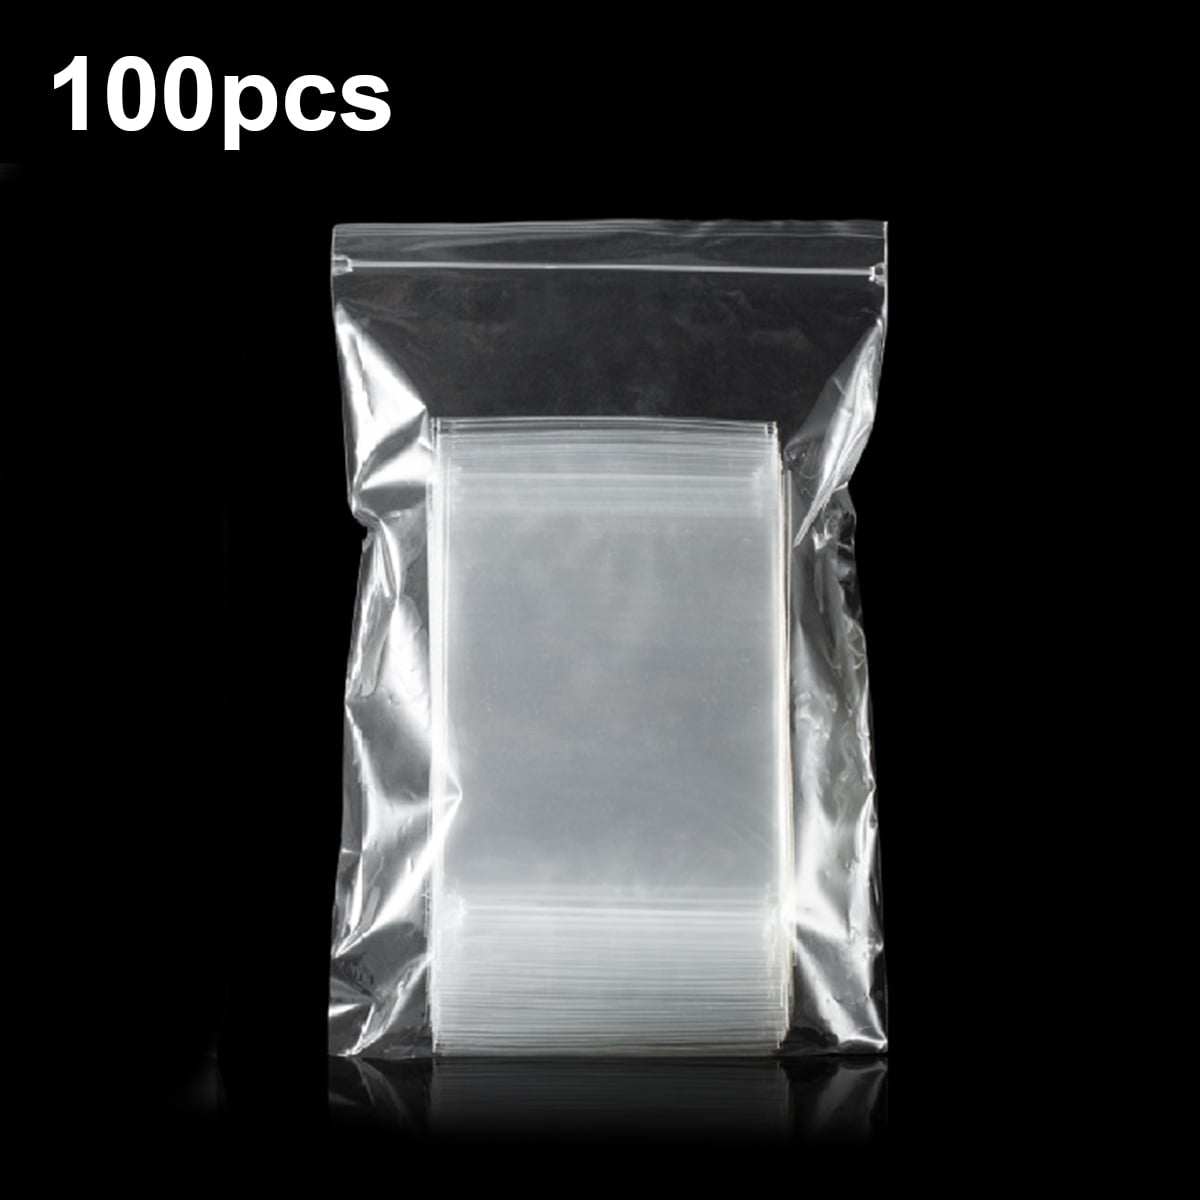 12 X 15” 2 Mil Clear Plastic Reclosable Zip Poly Bags with Resealable Lock Seal Zipper More Sizes Available Spartan Industrial || 200 Count